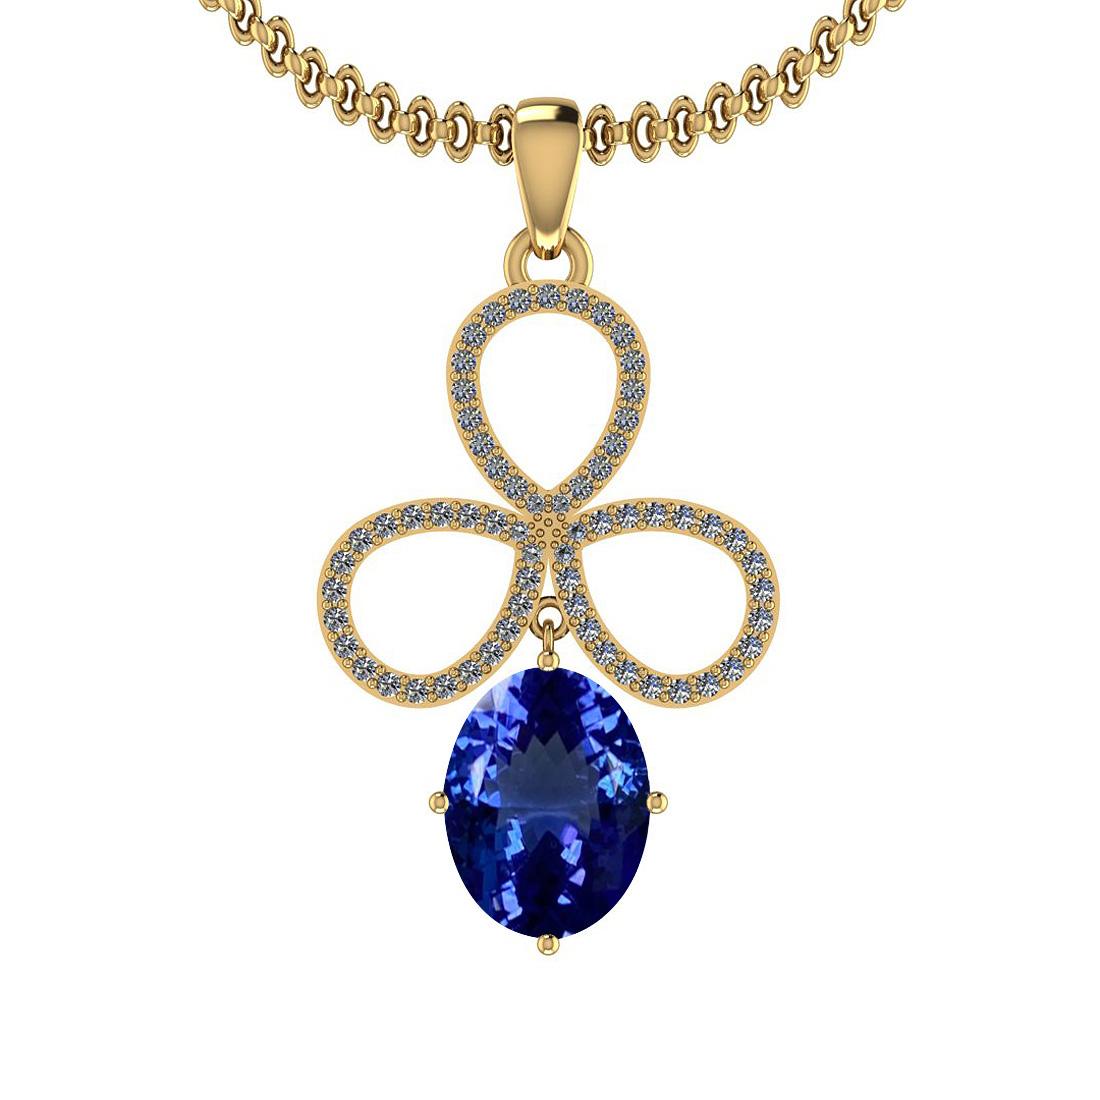 Certified 4.49 Ctw VS/SI1 Tanzanite And Diamond 14k Yellow Gold Victorian Style Necklace